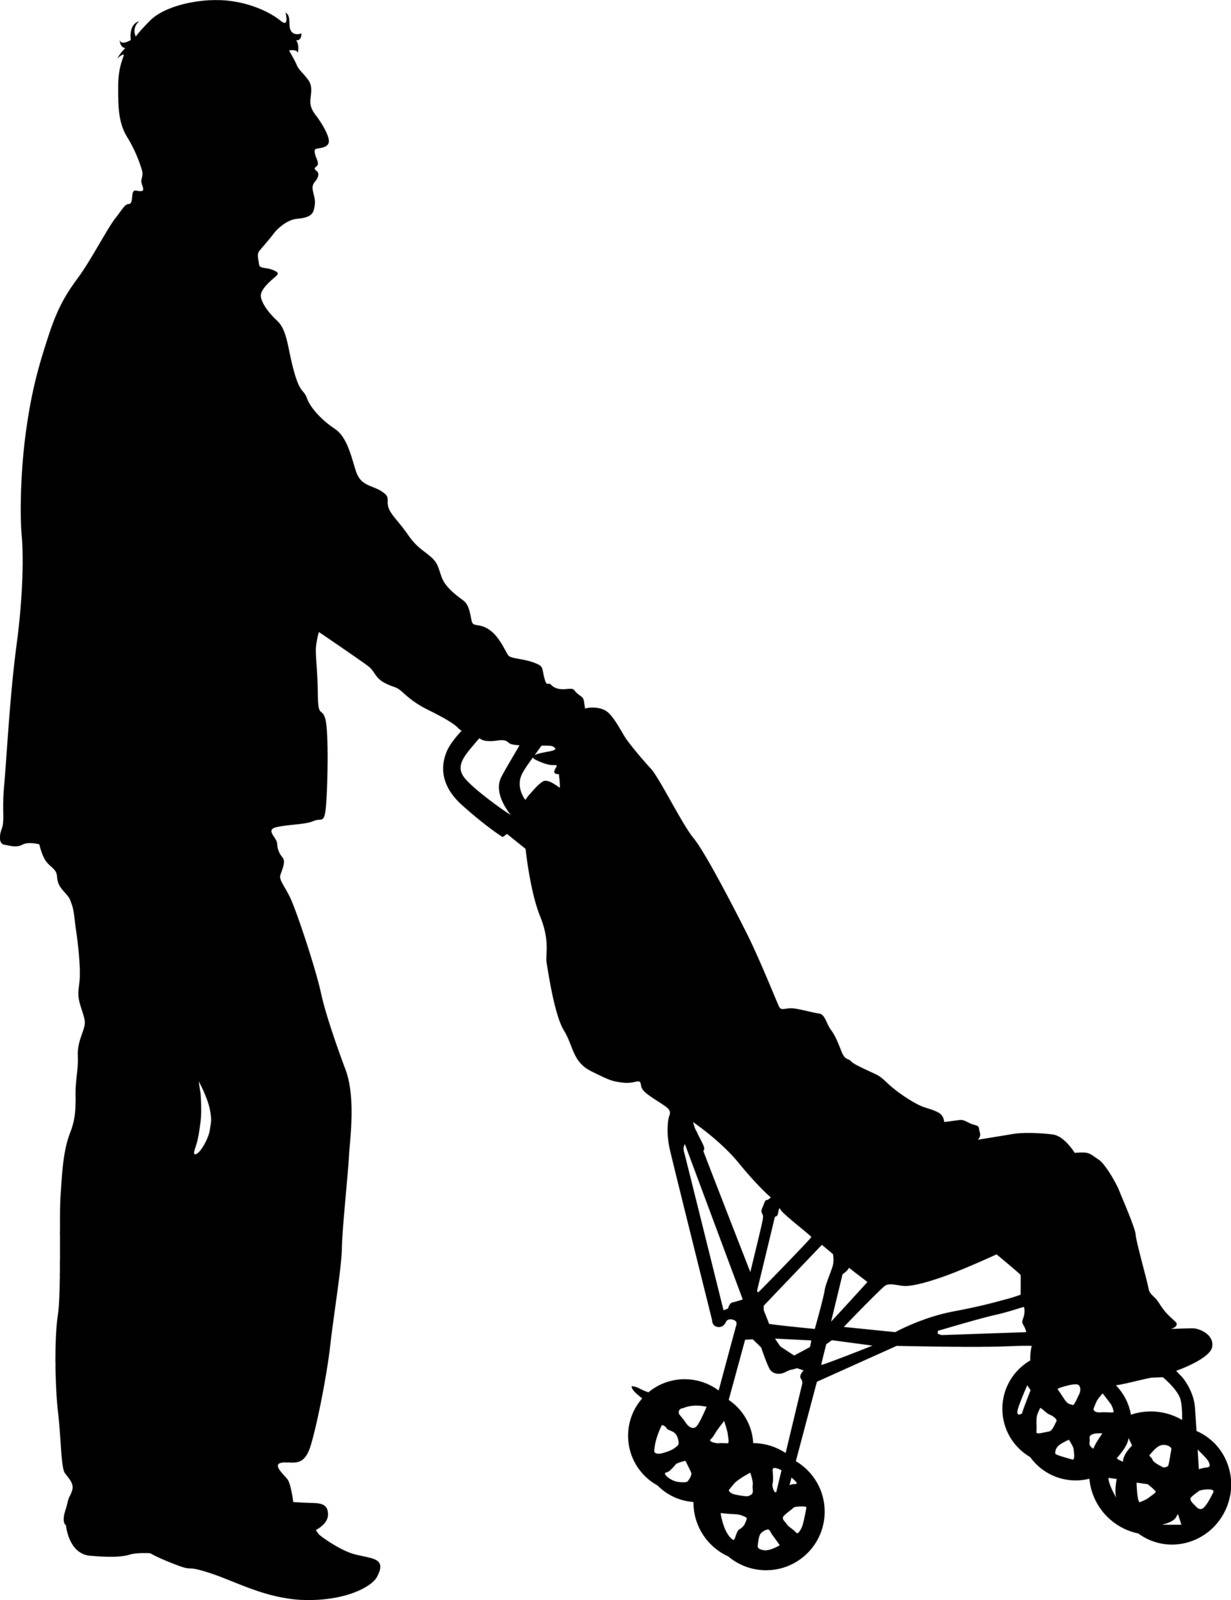 Black silhouettes father with pram on white background. Vector illustration by aarrows